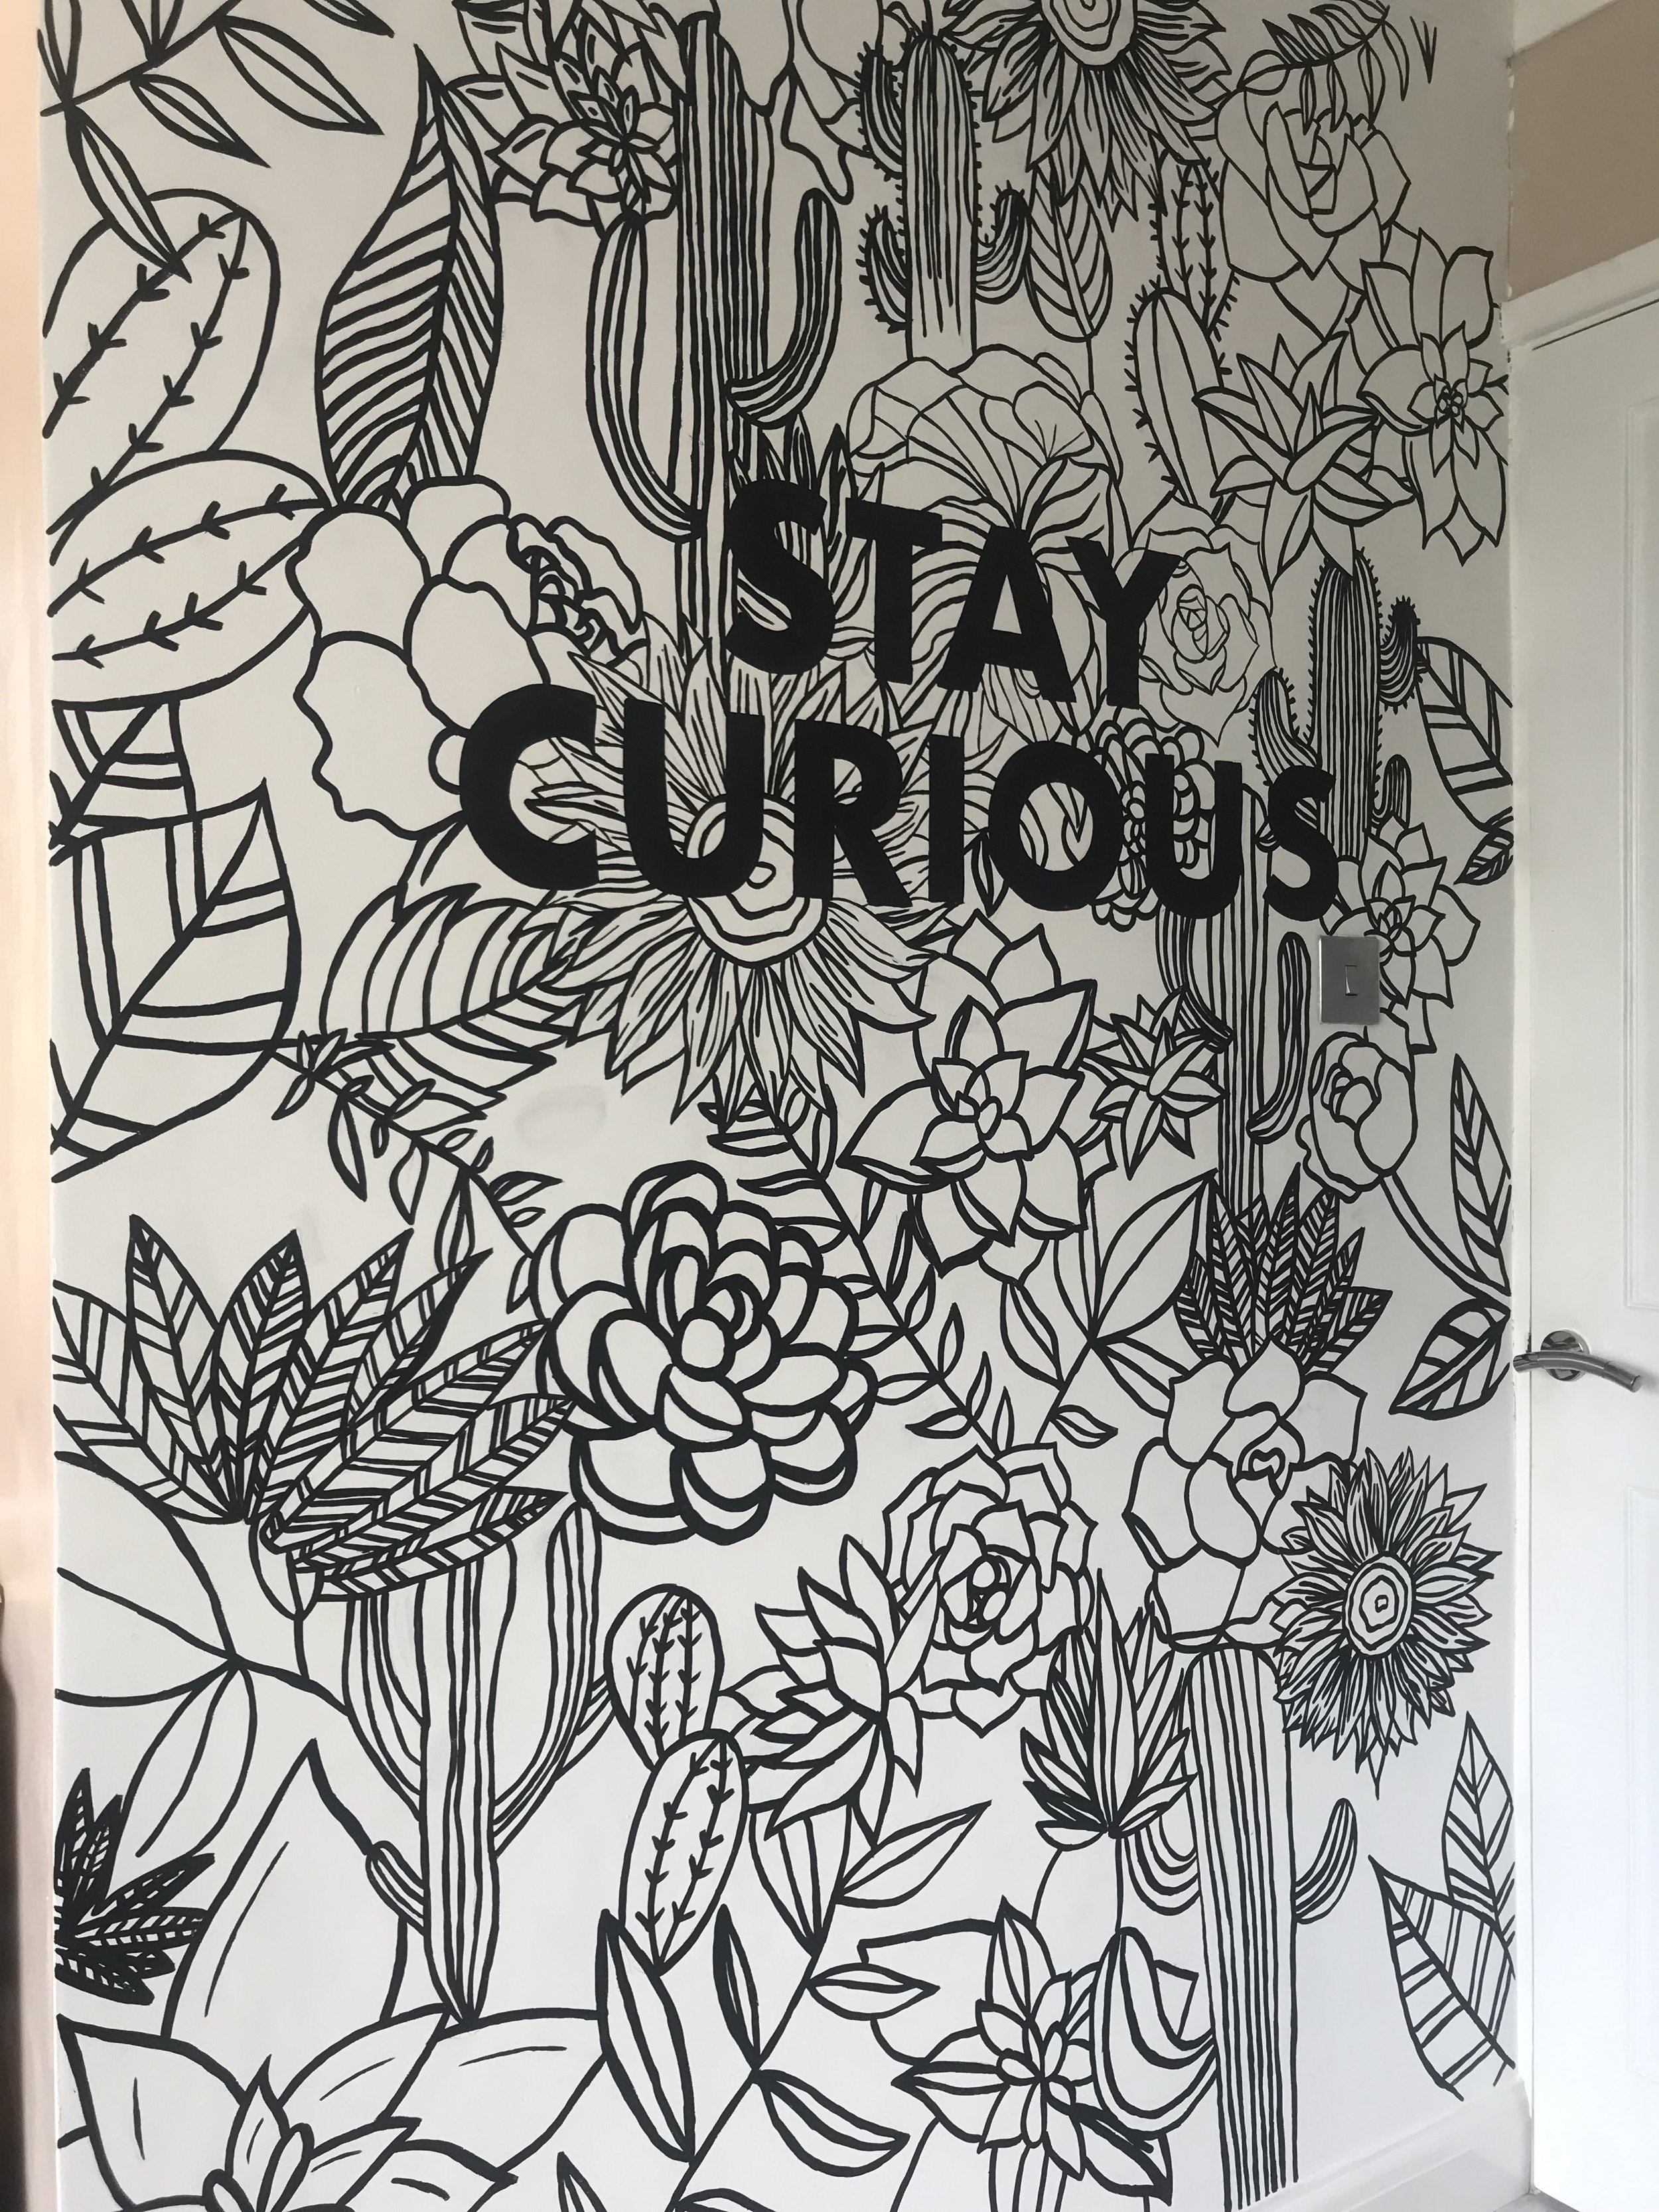 Stay Curious Mural by 2 Sisters